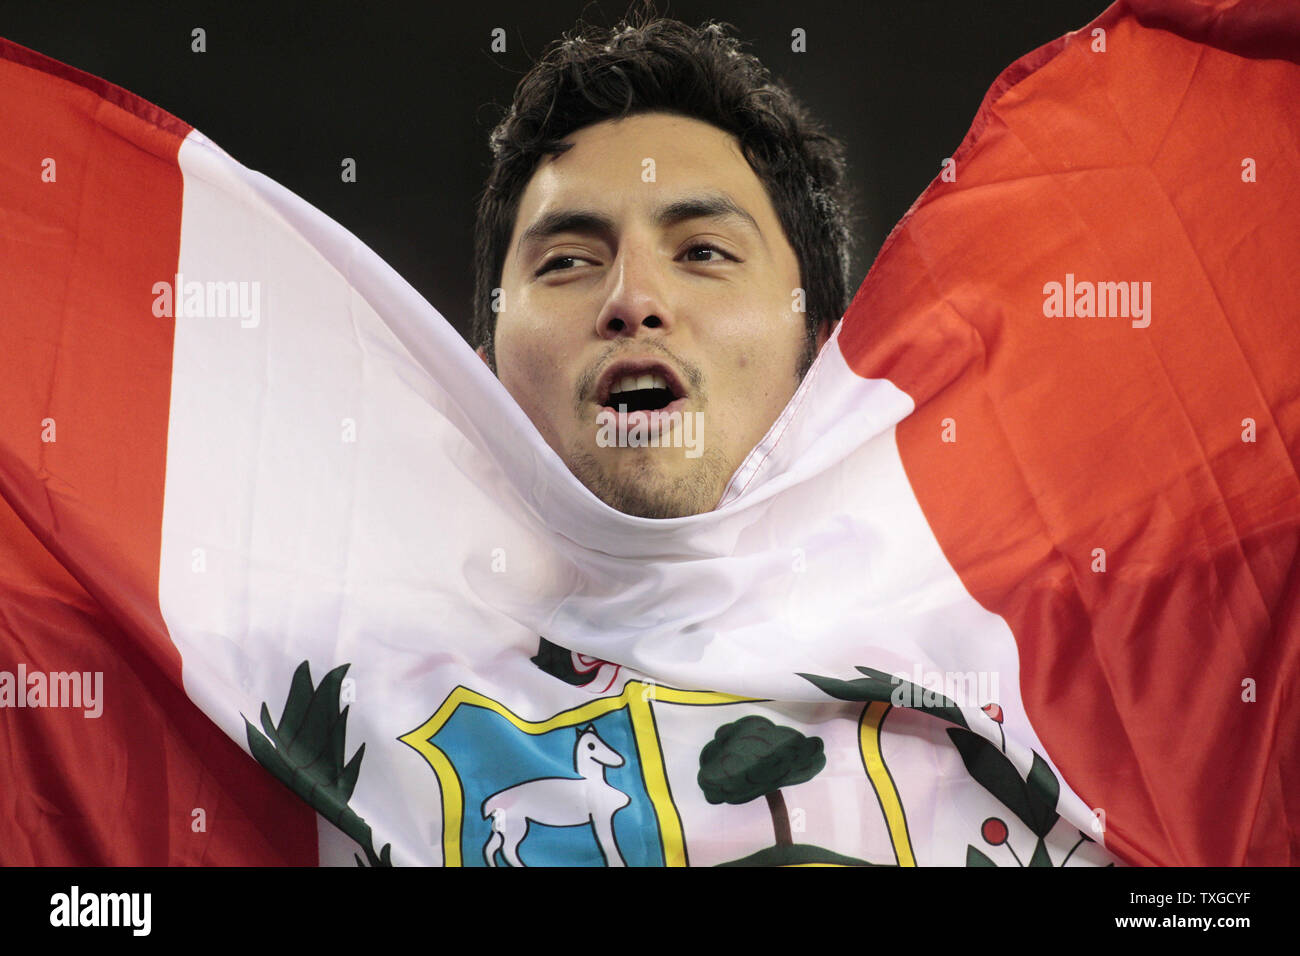 A Peru fan cheers for his team after they defeated Brazil in the 2016 Copa America Centenario Group B match at Gillette Stadium in Foxborough, Massachusetts on June 12, 2016. Peru defeated Brazil 1-0.  Photo by Matthew Healey/UPI Stock Photo